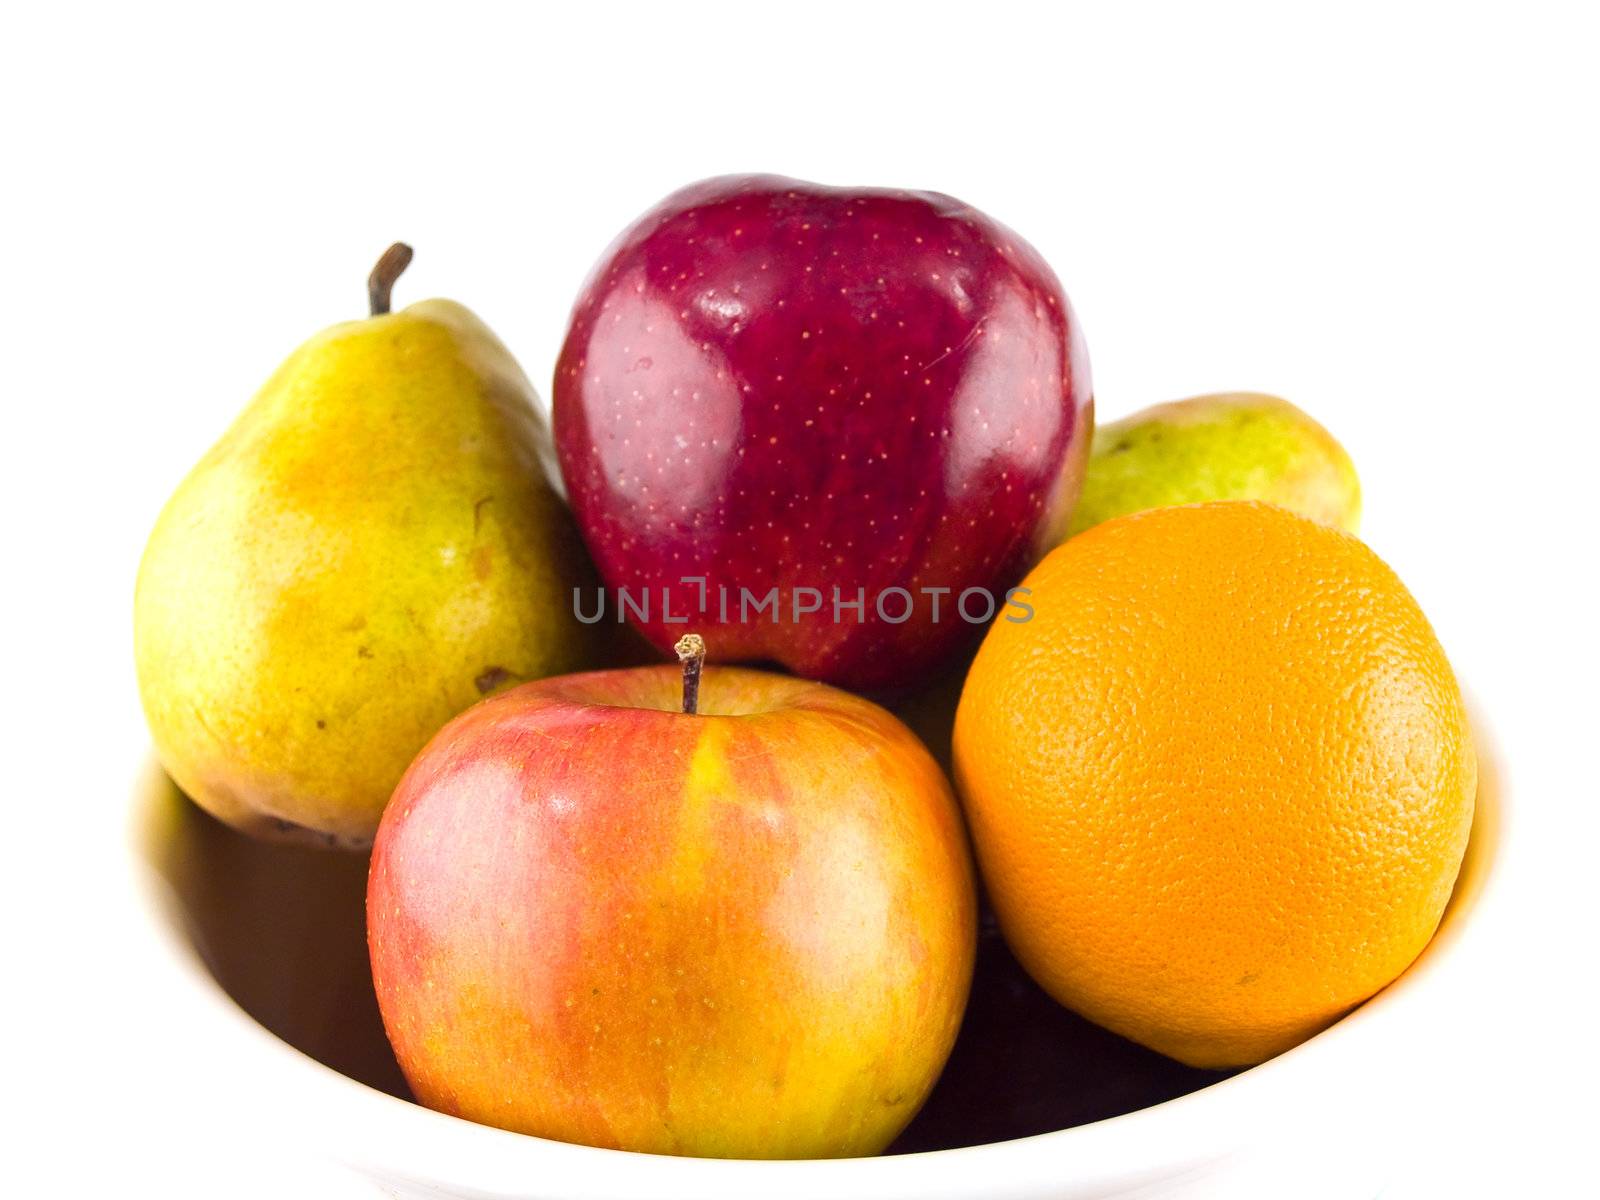 A Bowl of Fruit Apples Pears and Oranges